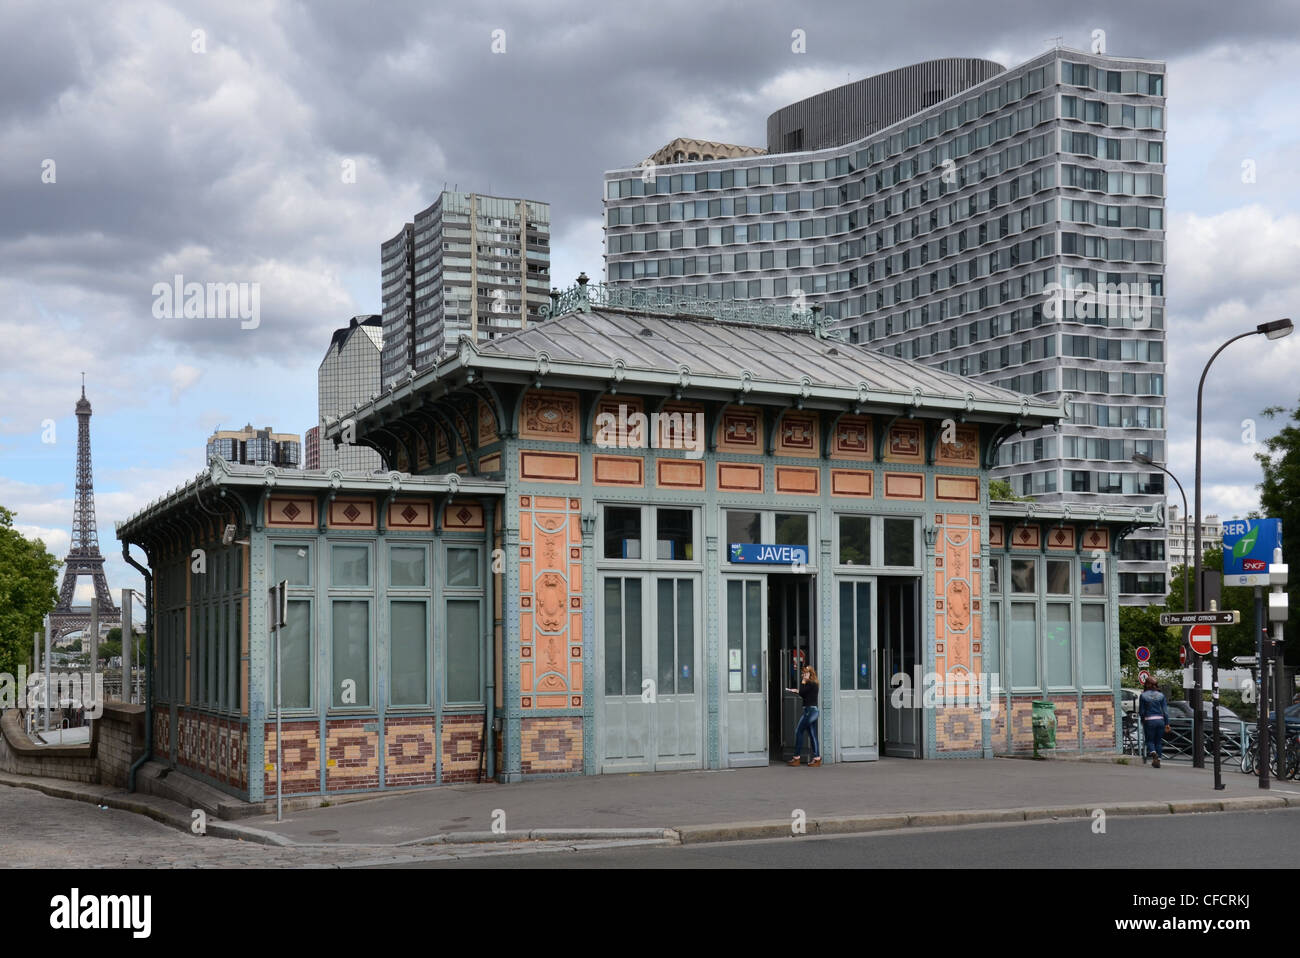 Javel RER station by the Pont Mirabeau on the Quai Andre Citroen by the Seine in the 15th arrondissement of Paris, France. Stock Photo